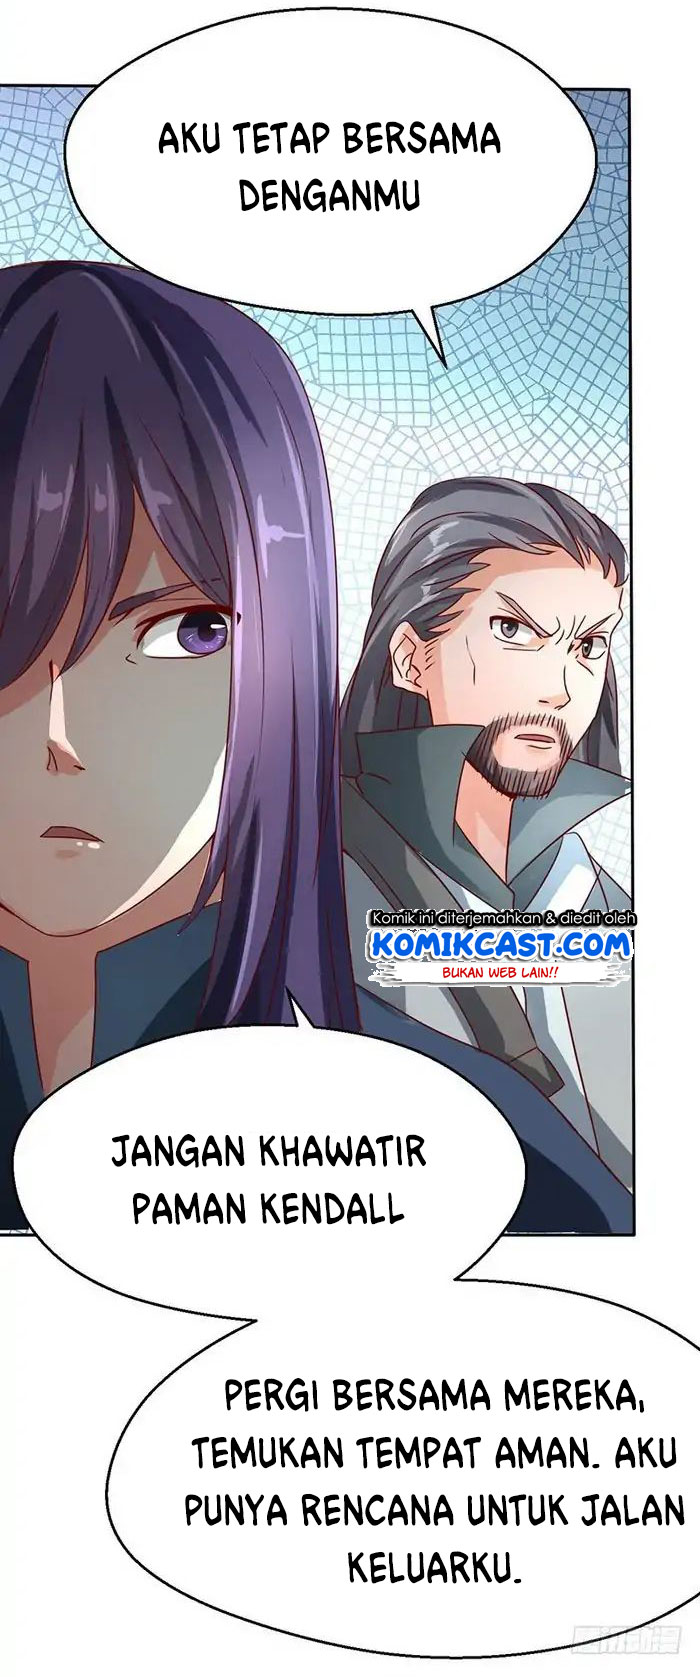 Chaotic Sword God Chapter 45